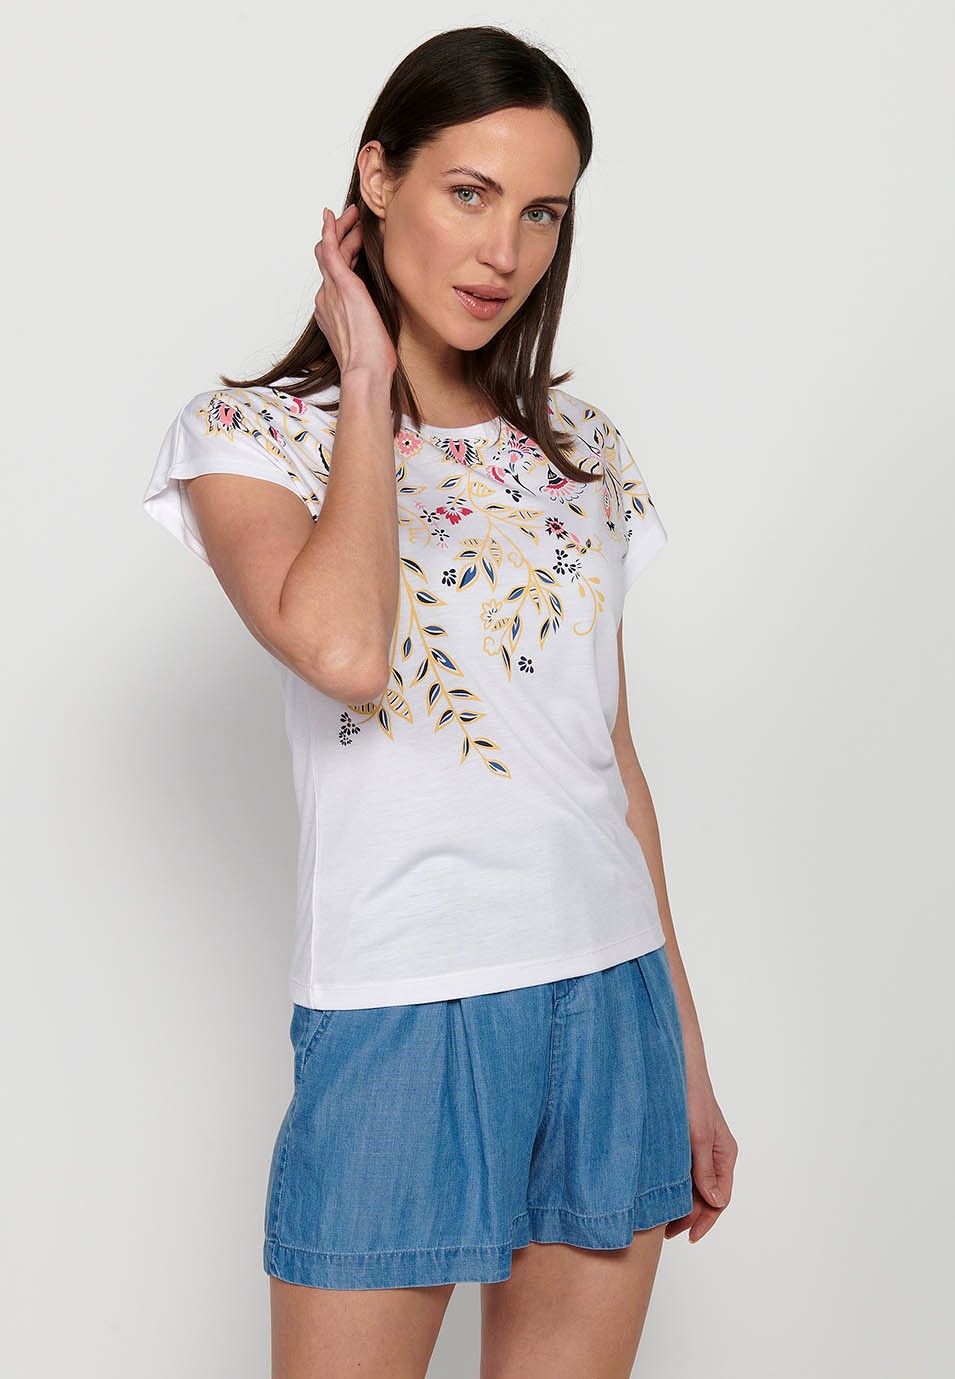 Women's White Round Neck Short Sleeve Cotton Top with Front Floral Embroidery